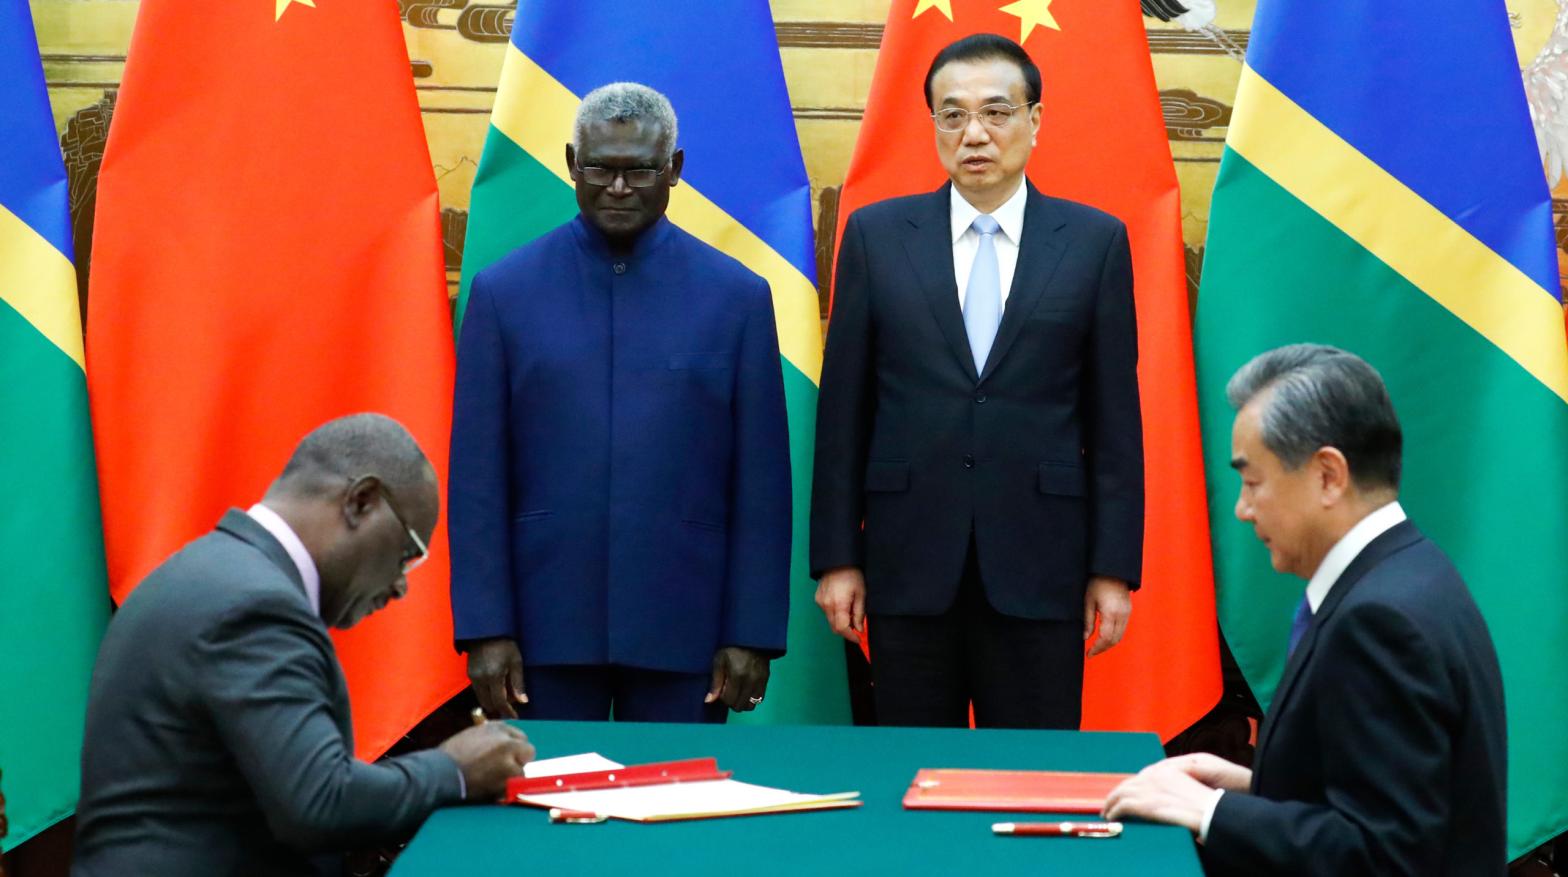 Solomon Islands Prime Minister Manasseh Sogavare meets with Chinese Premier Li Keqiang at a signing ceremony in 2019. (Photo: Thomas Peter-Pool, Getty Images)